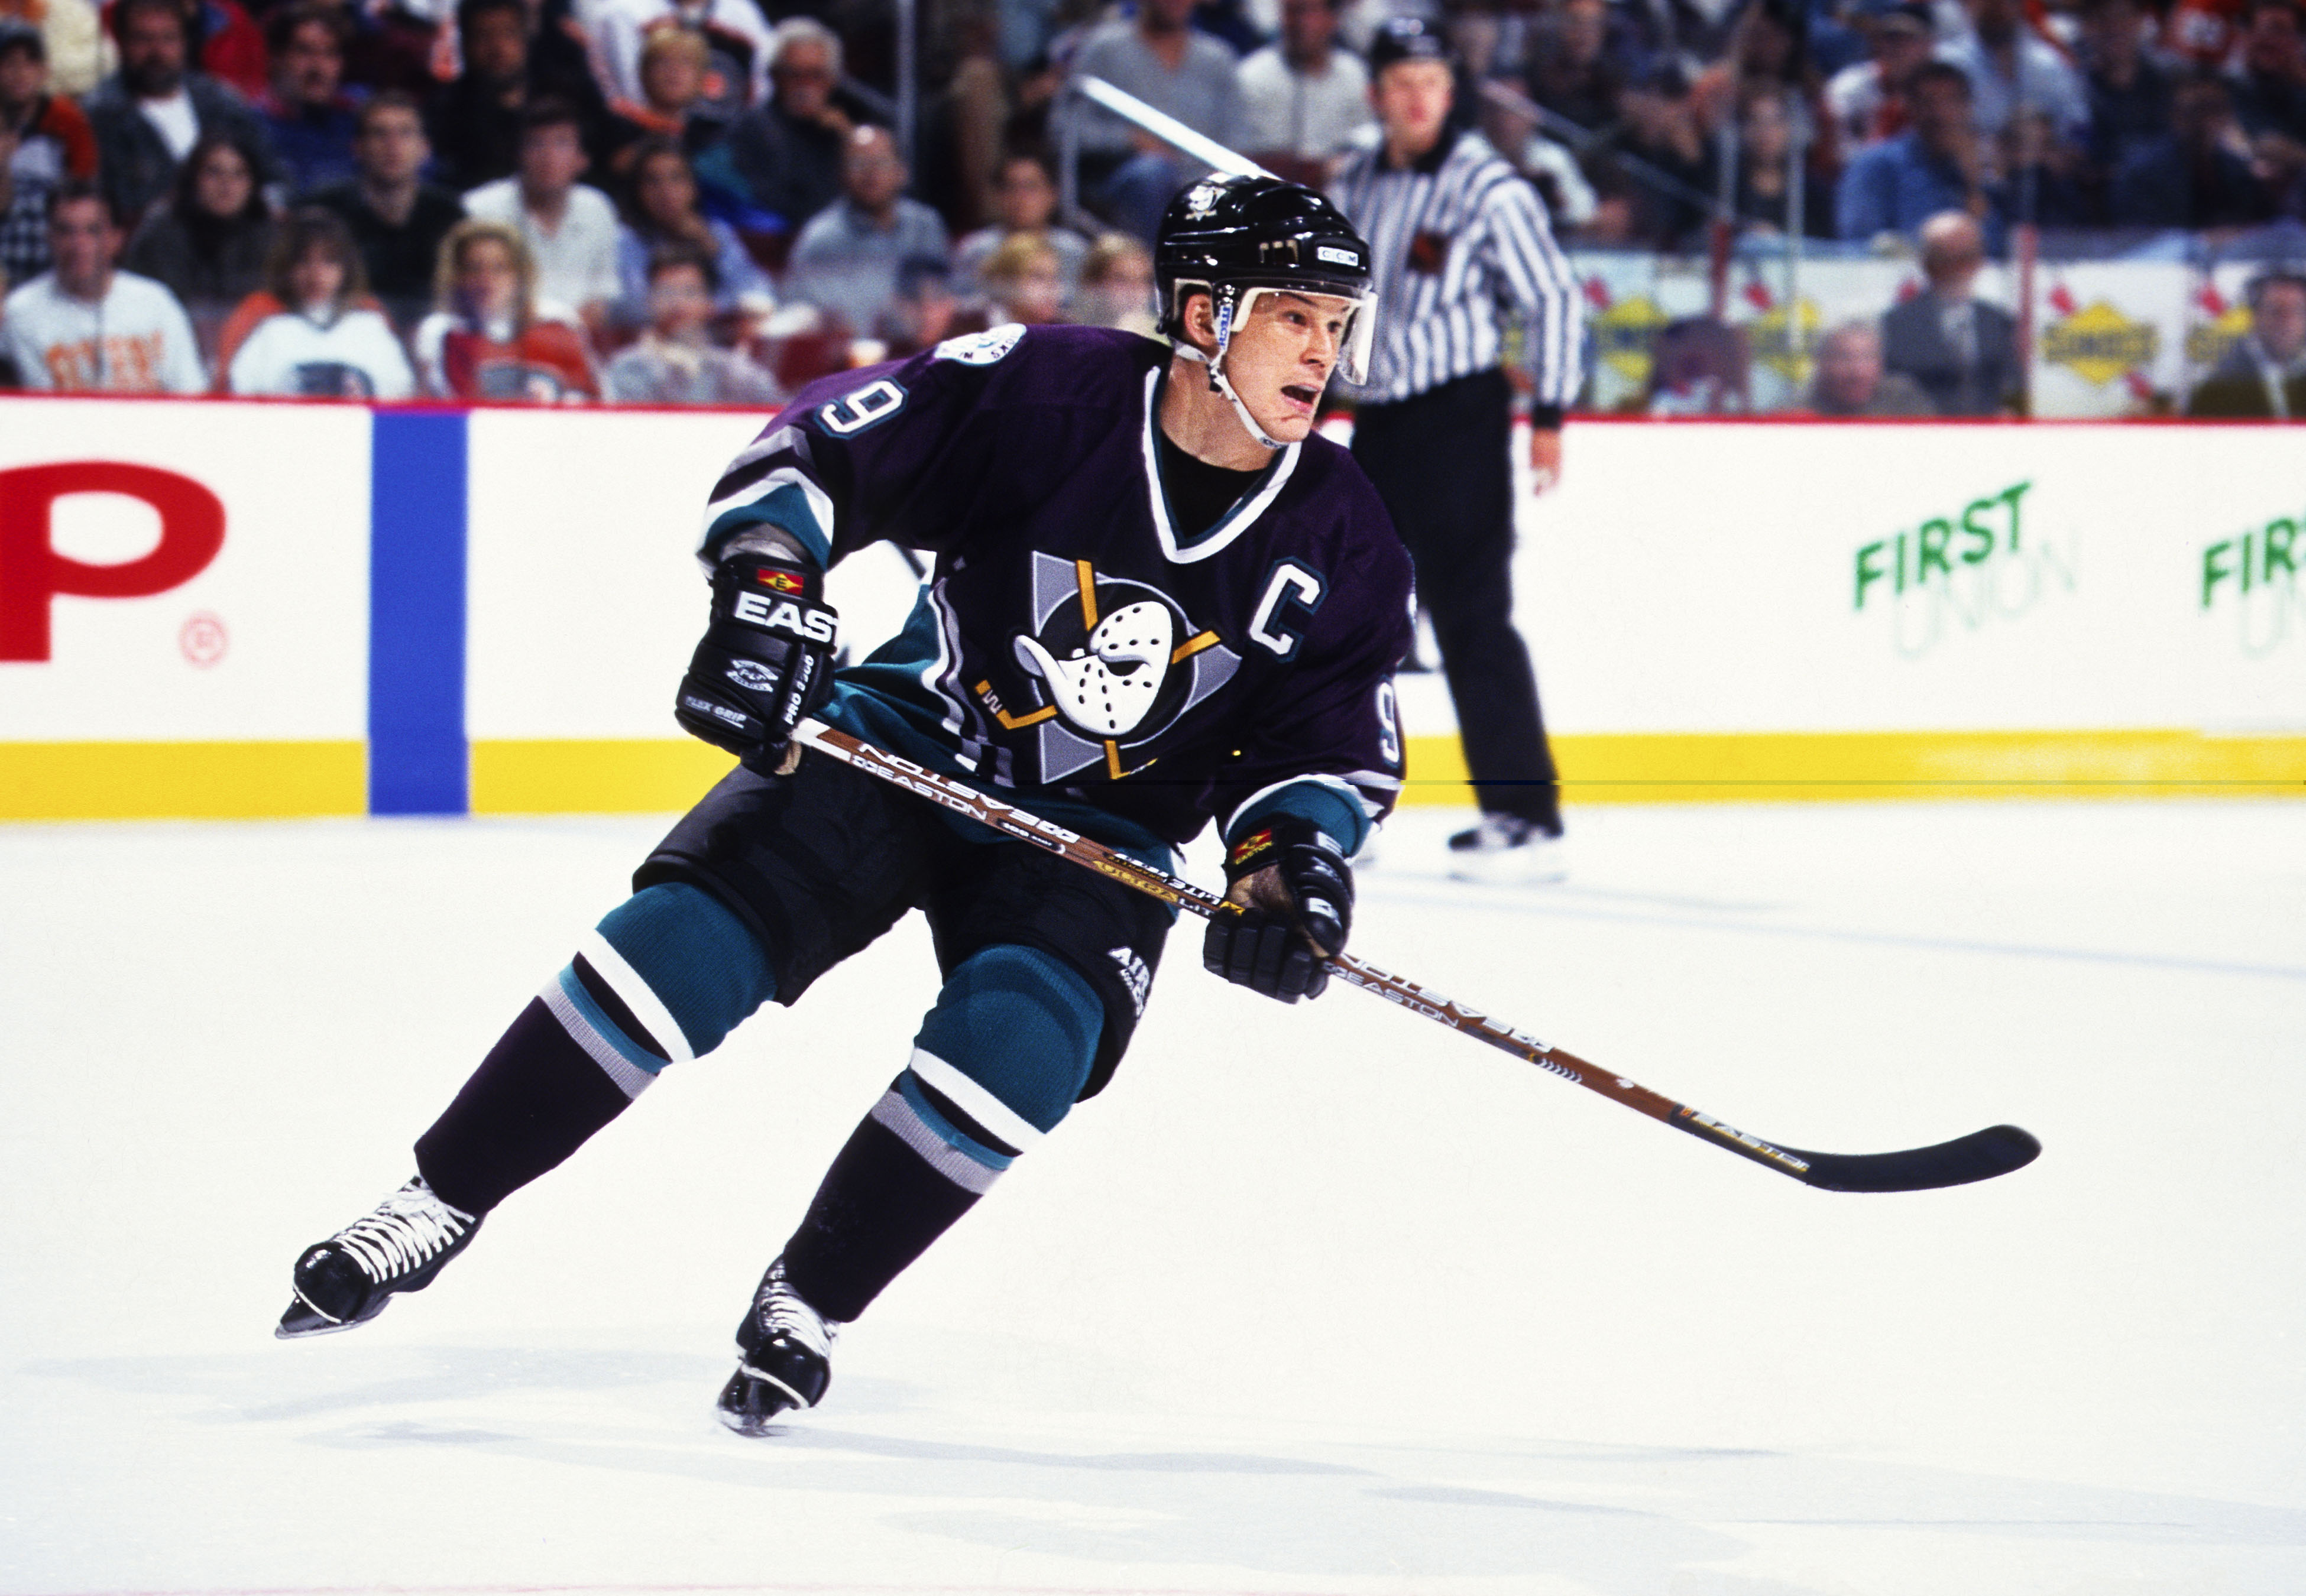 Hall of Famer Paul Kariya brought the NHL one of its first Asian